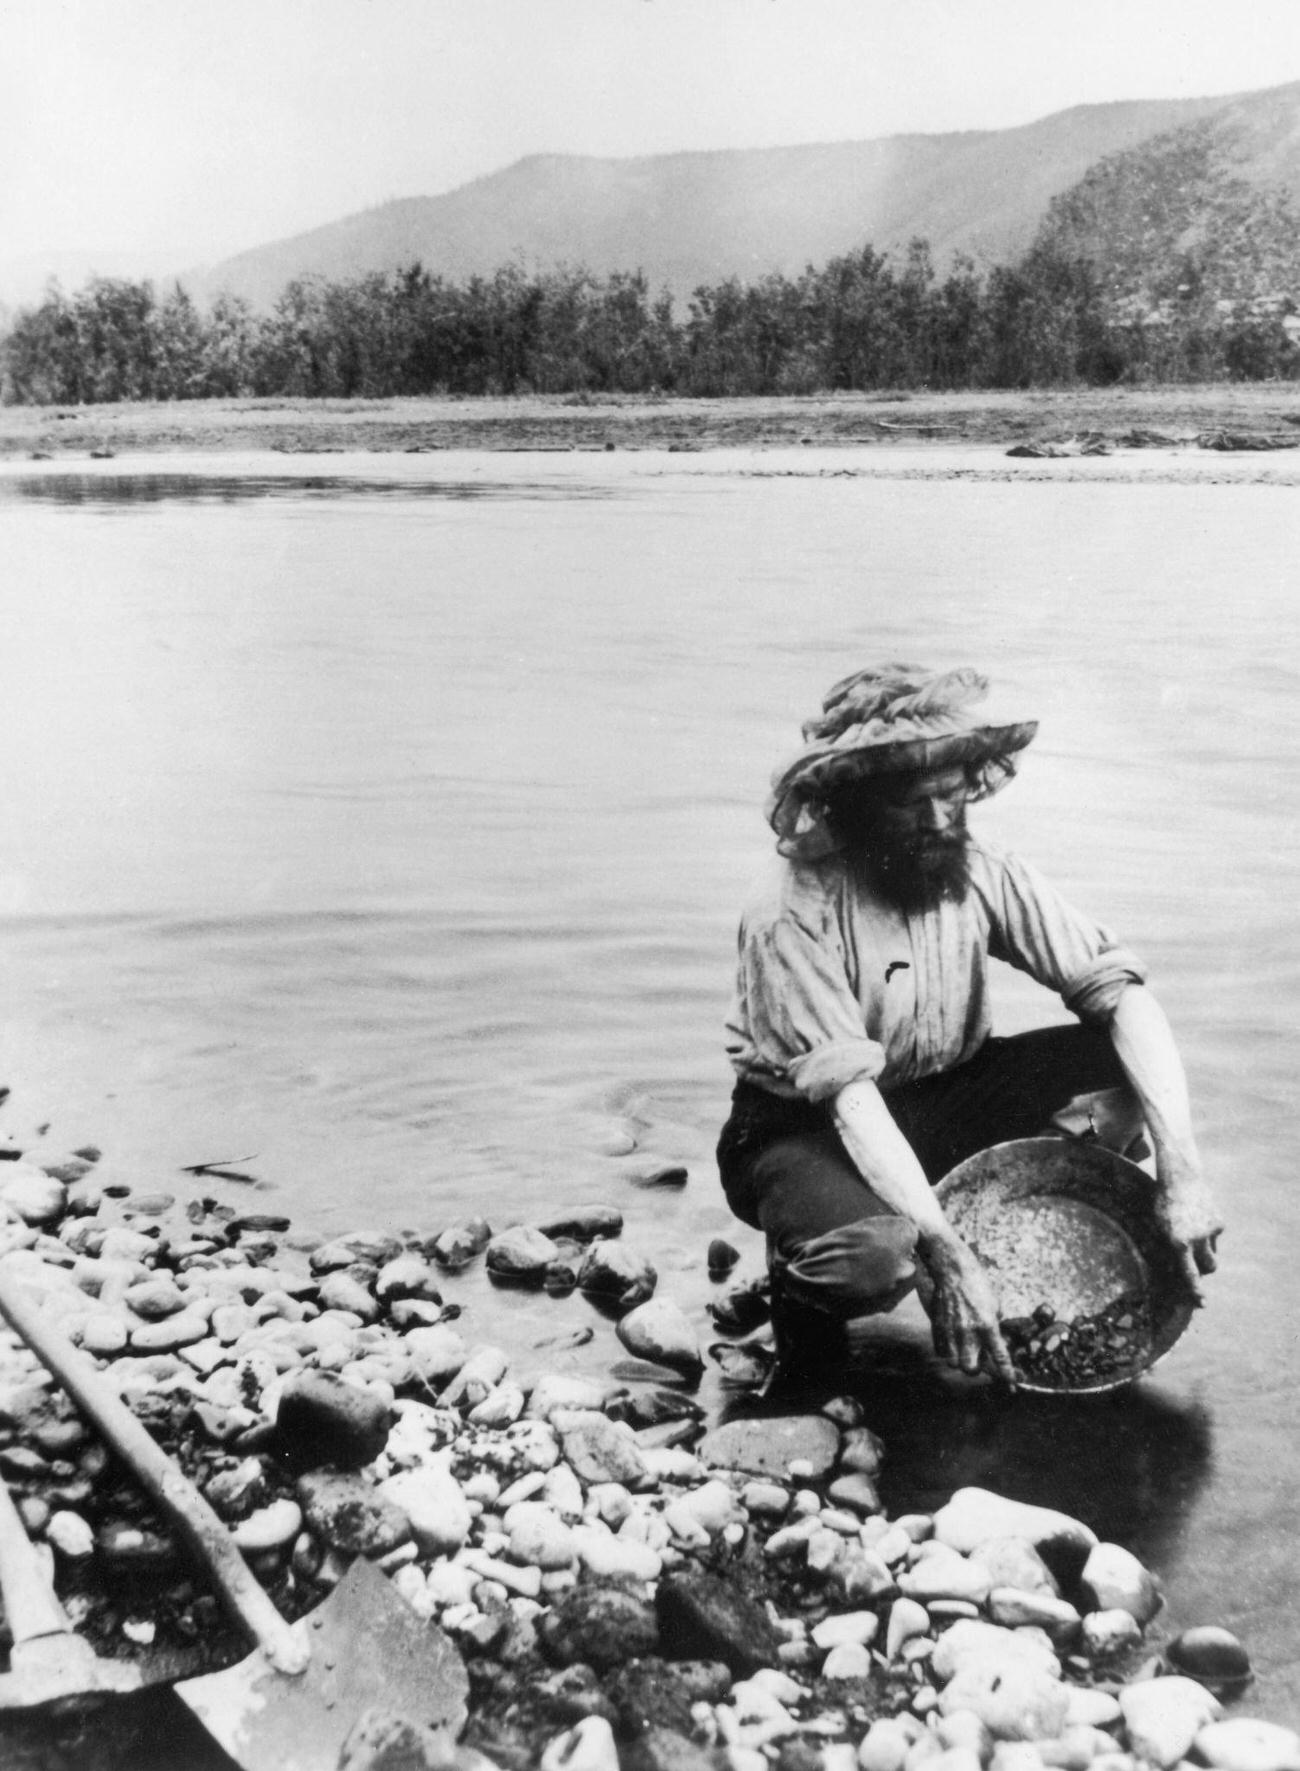 A gold prospector panning for alluvial gold in the Klondike, Yukon Territory, Canada, 1898.